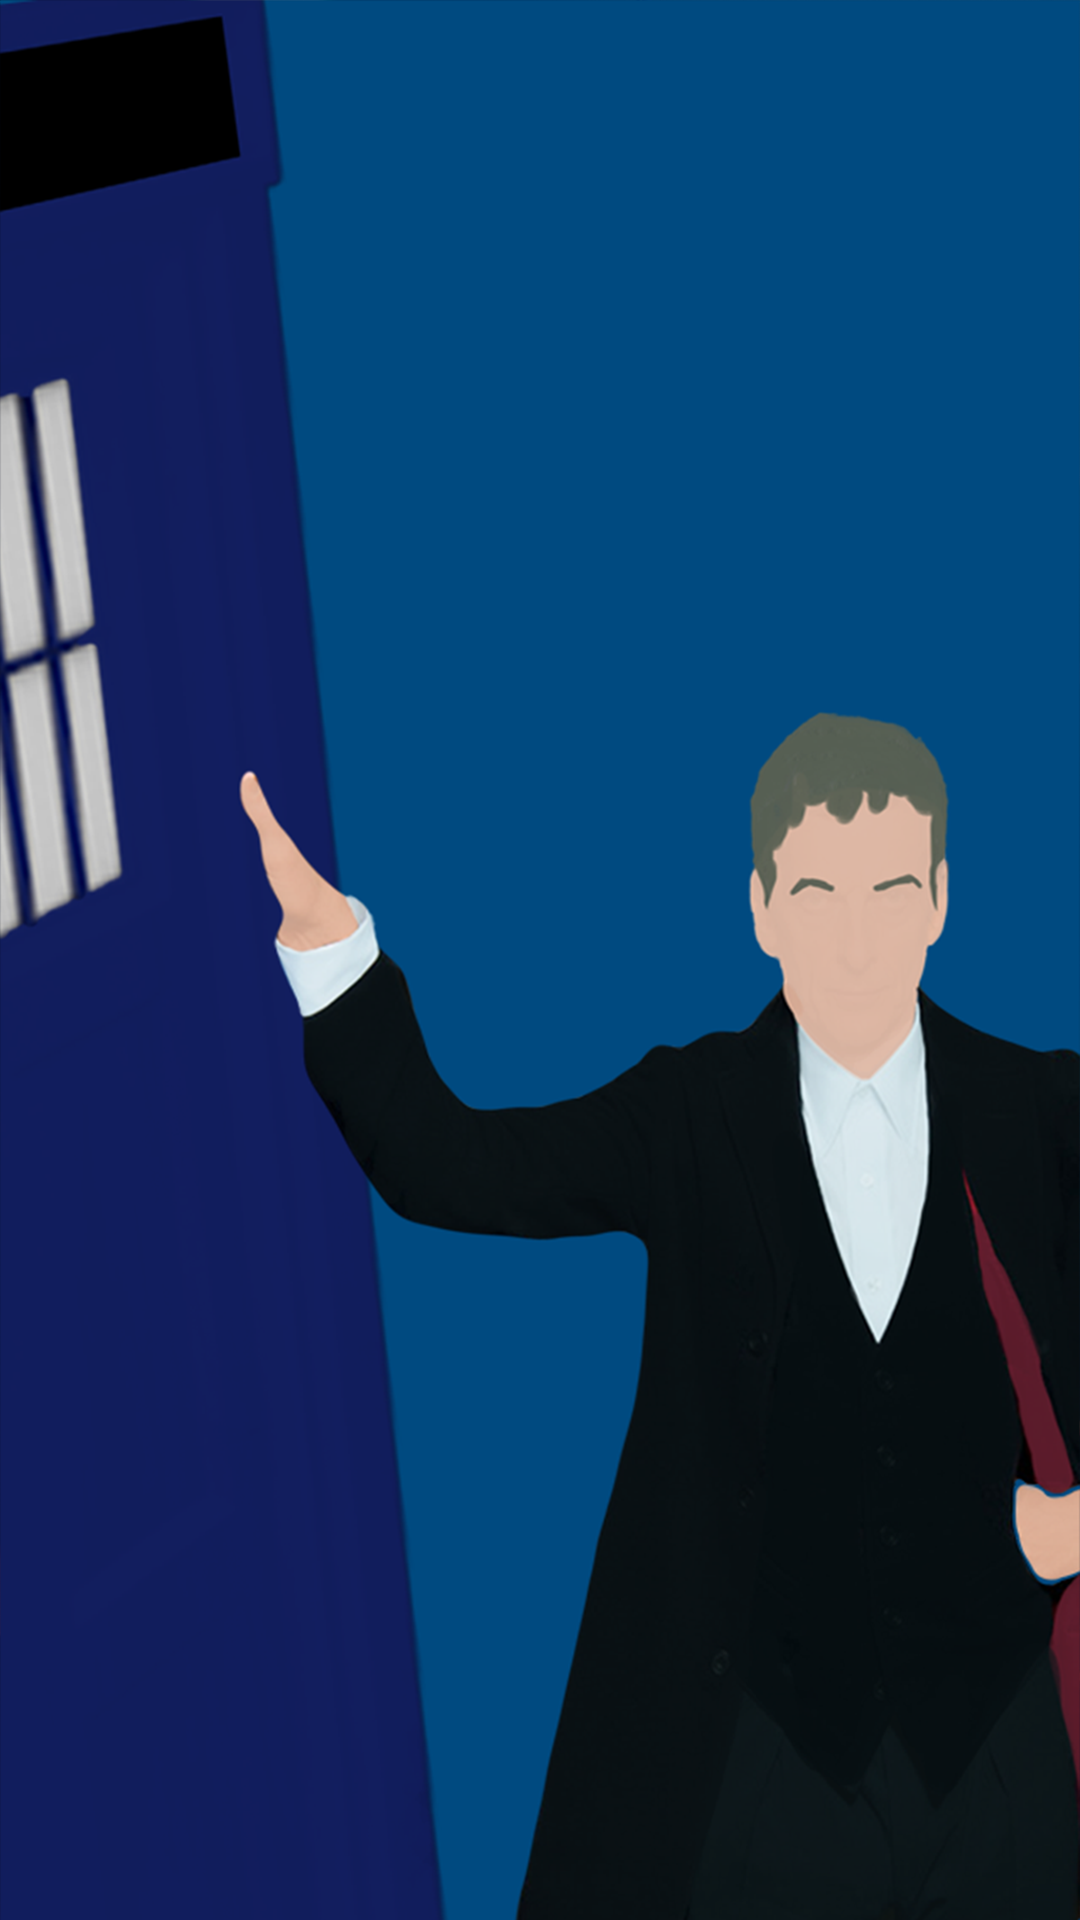 Download these minimalistic Season 8 Doctor Who wallpaper!